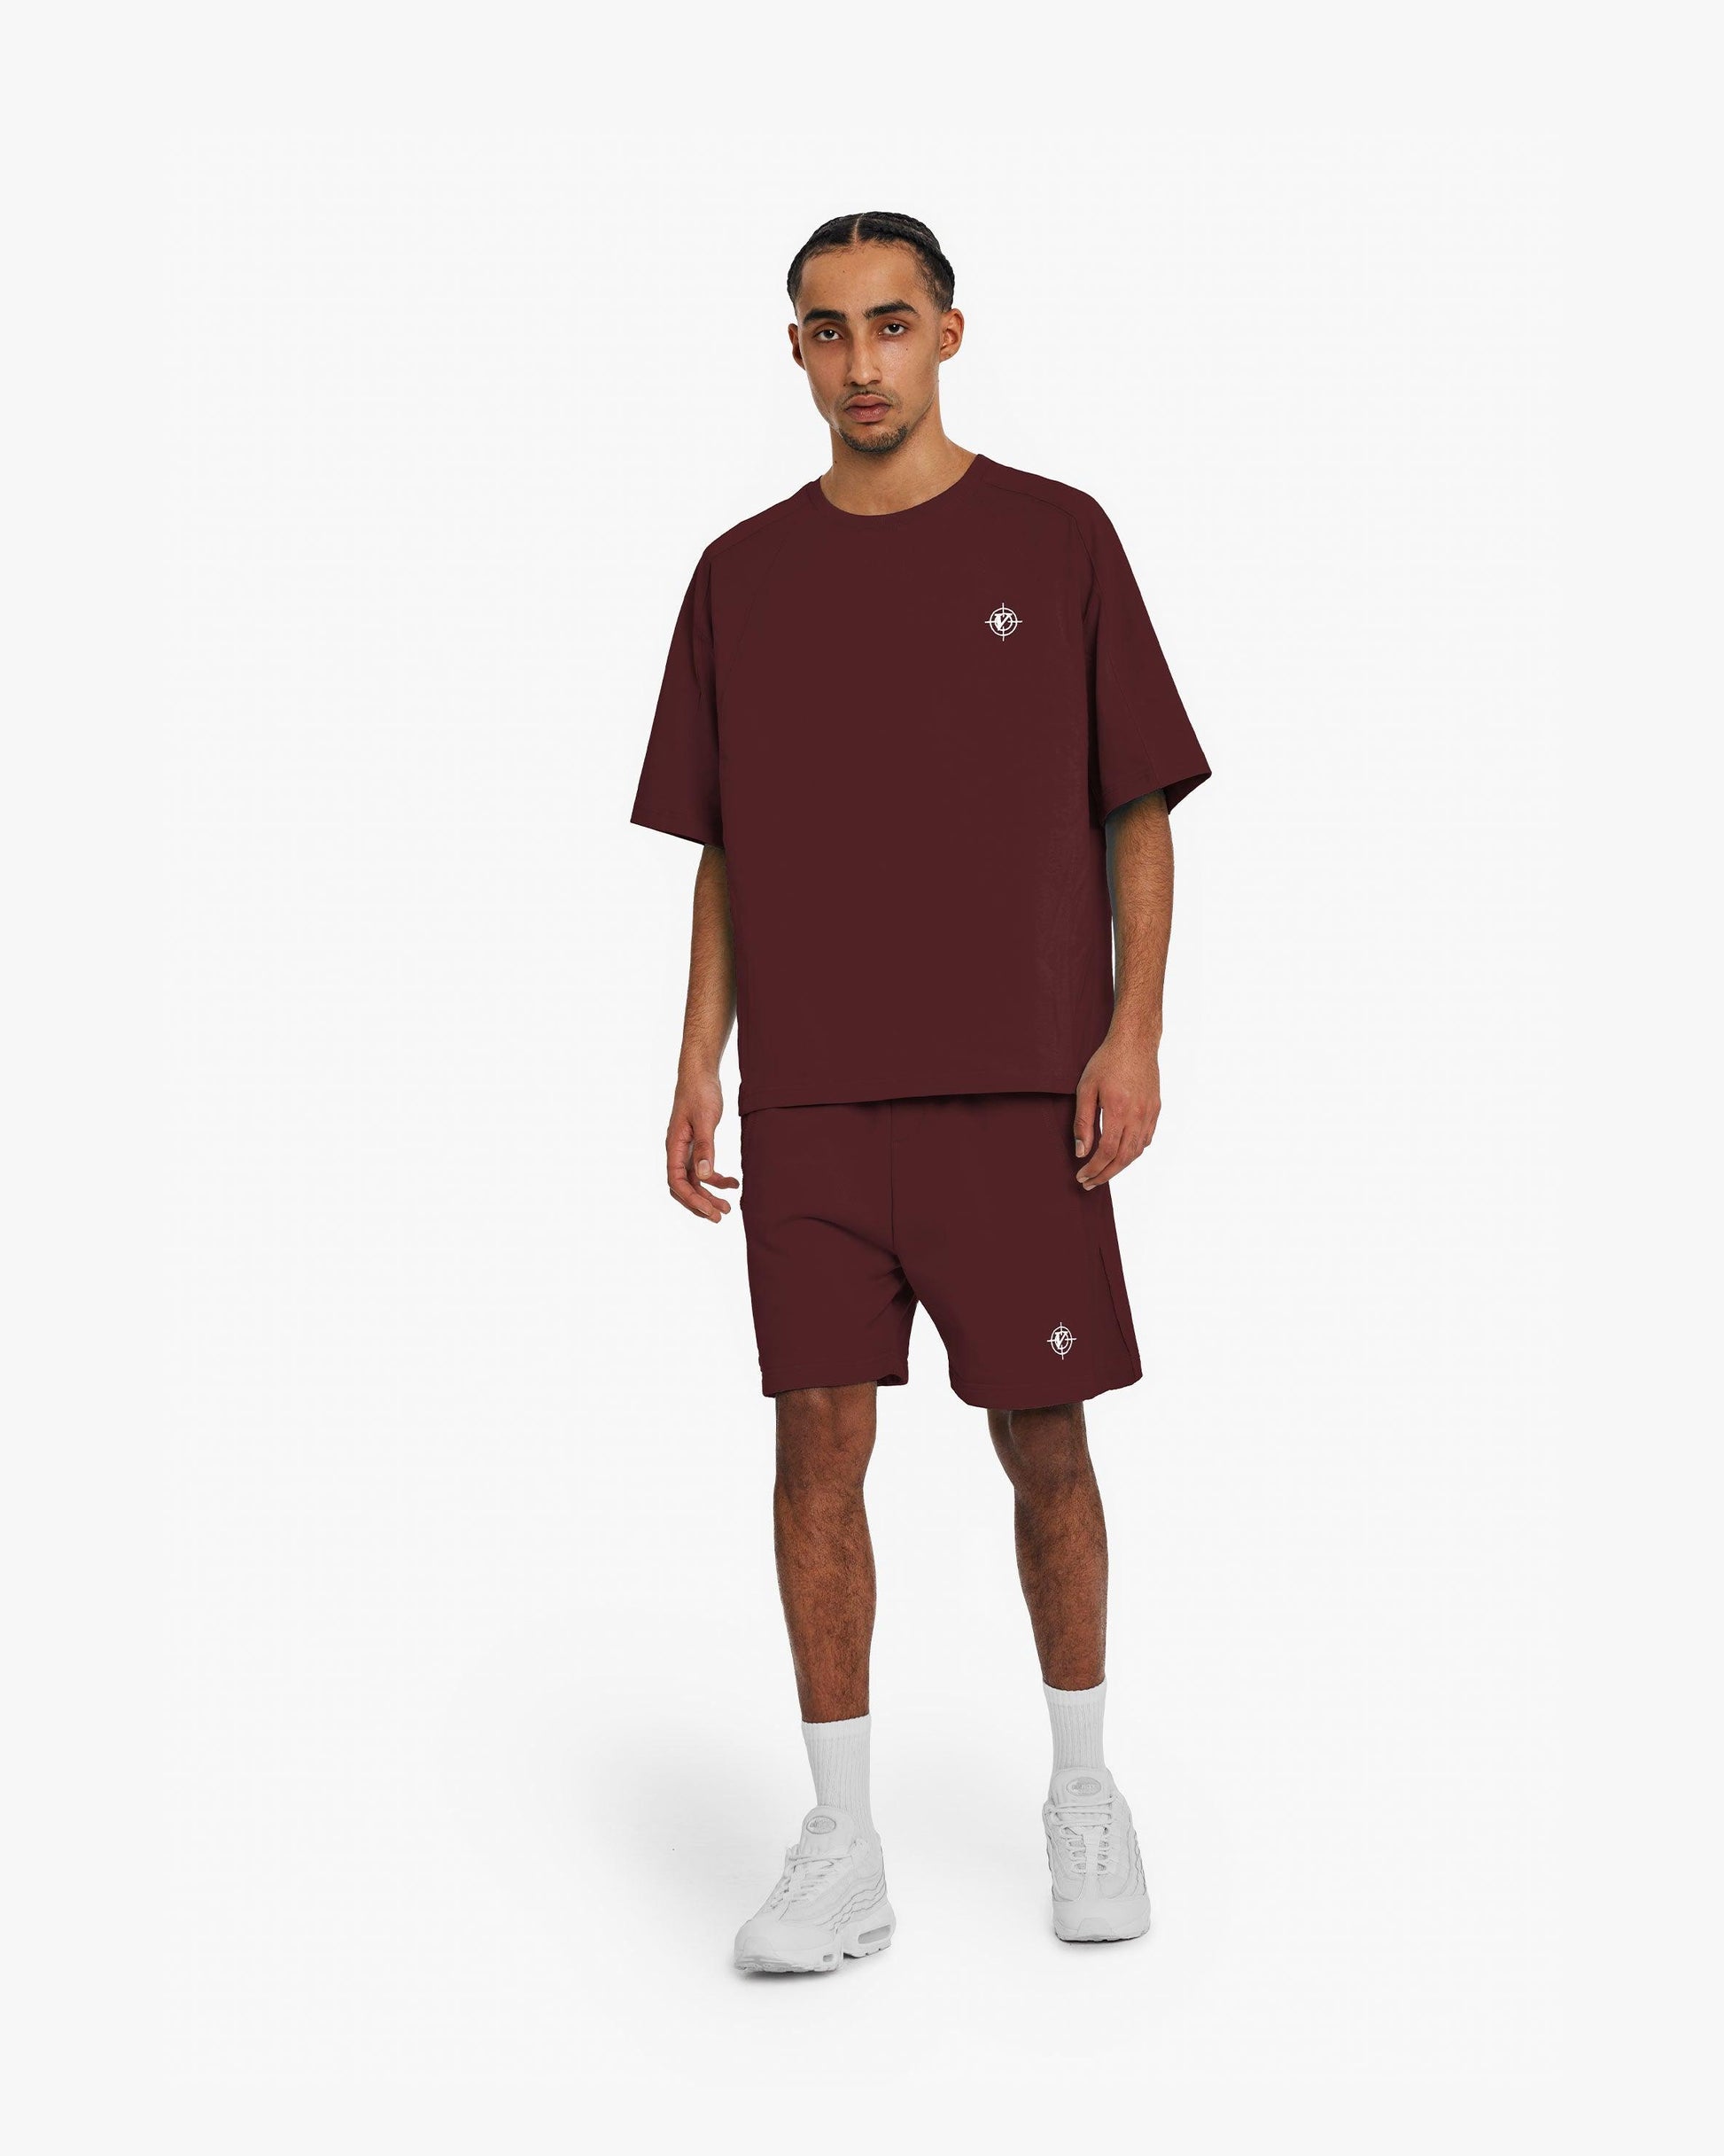 T-SHIRT WINE RED - VICINITY